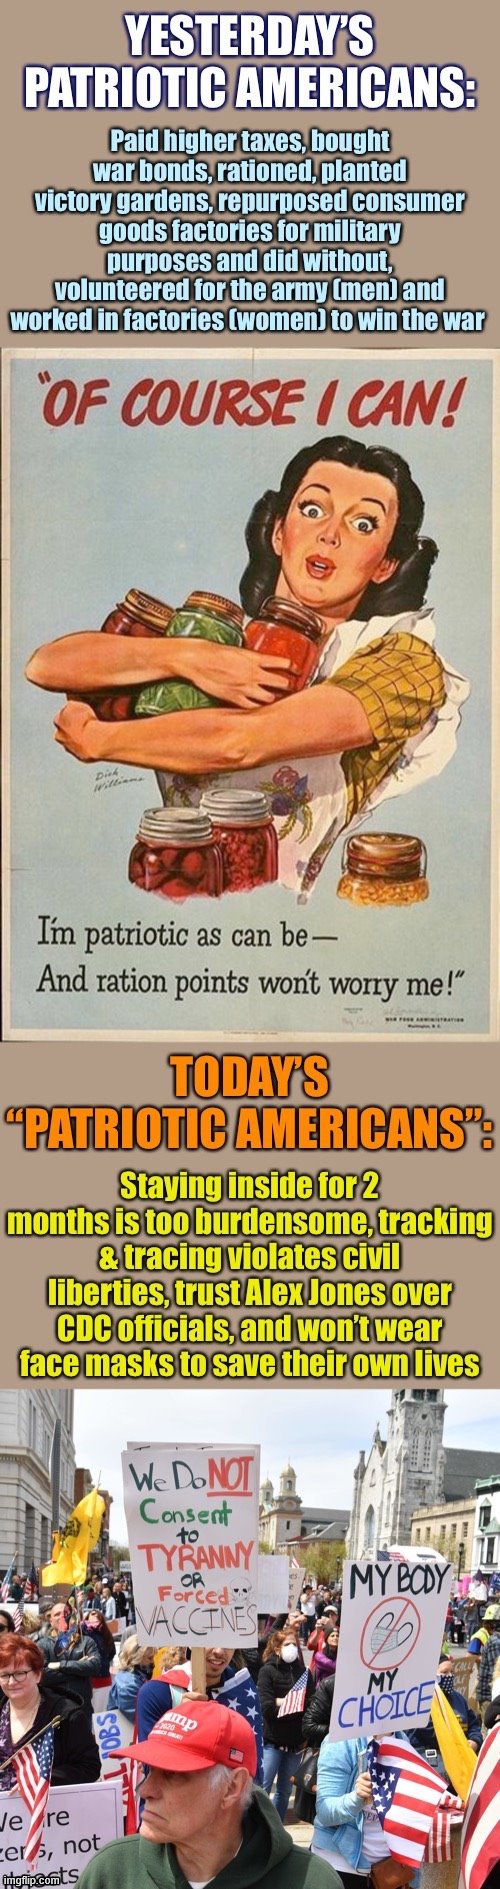 American greatness, then and now. | image tagged in maga,patriotism,wwii,covid-19,sacrifice,freedom | made w/ Imgflip meme maker